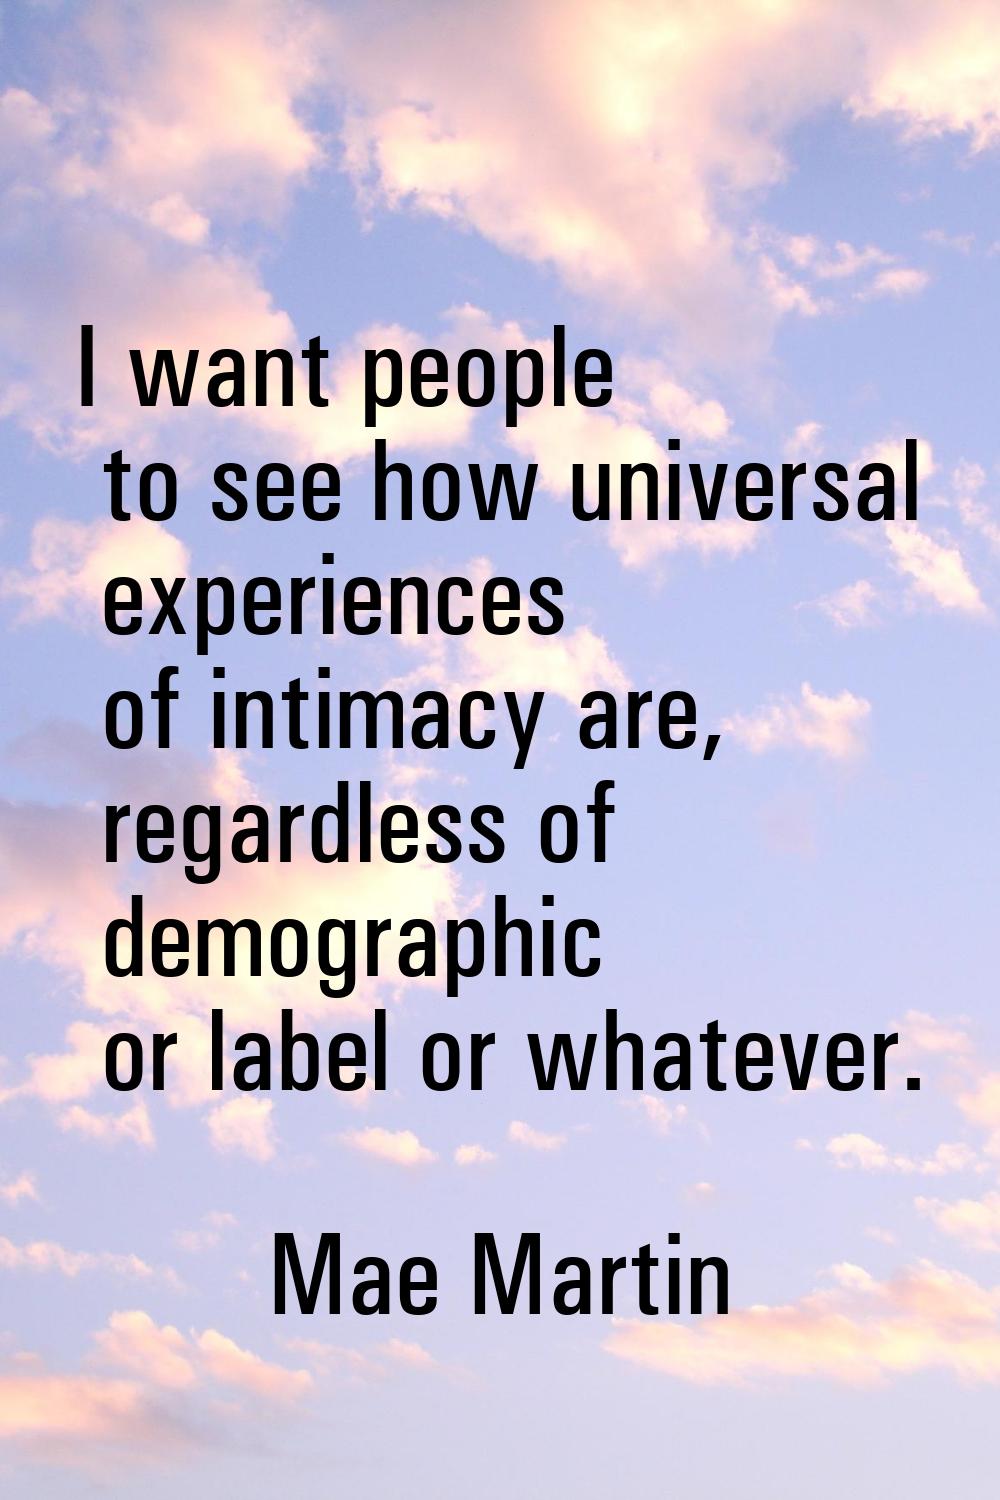 I want people to see how universal experiences of intimacy are, regardless of demographic or label 